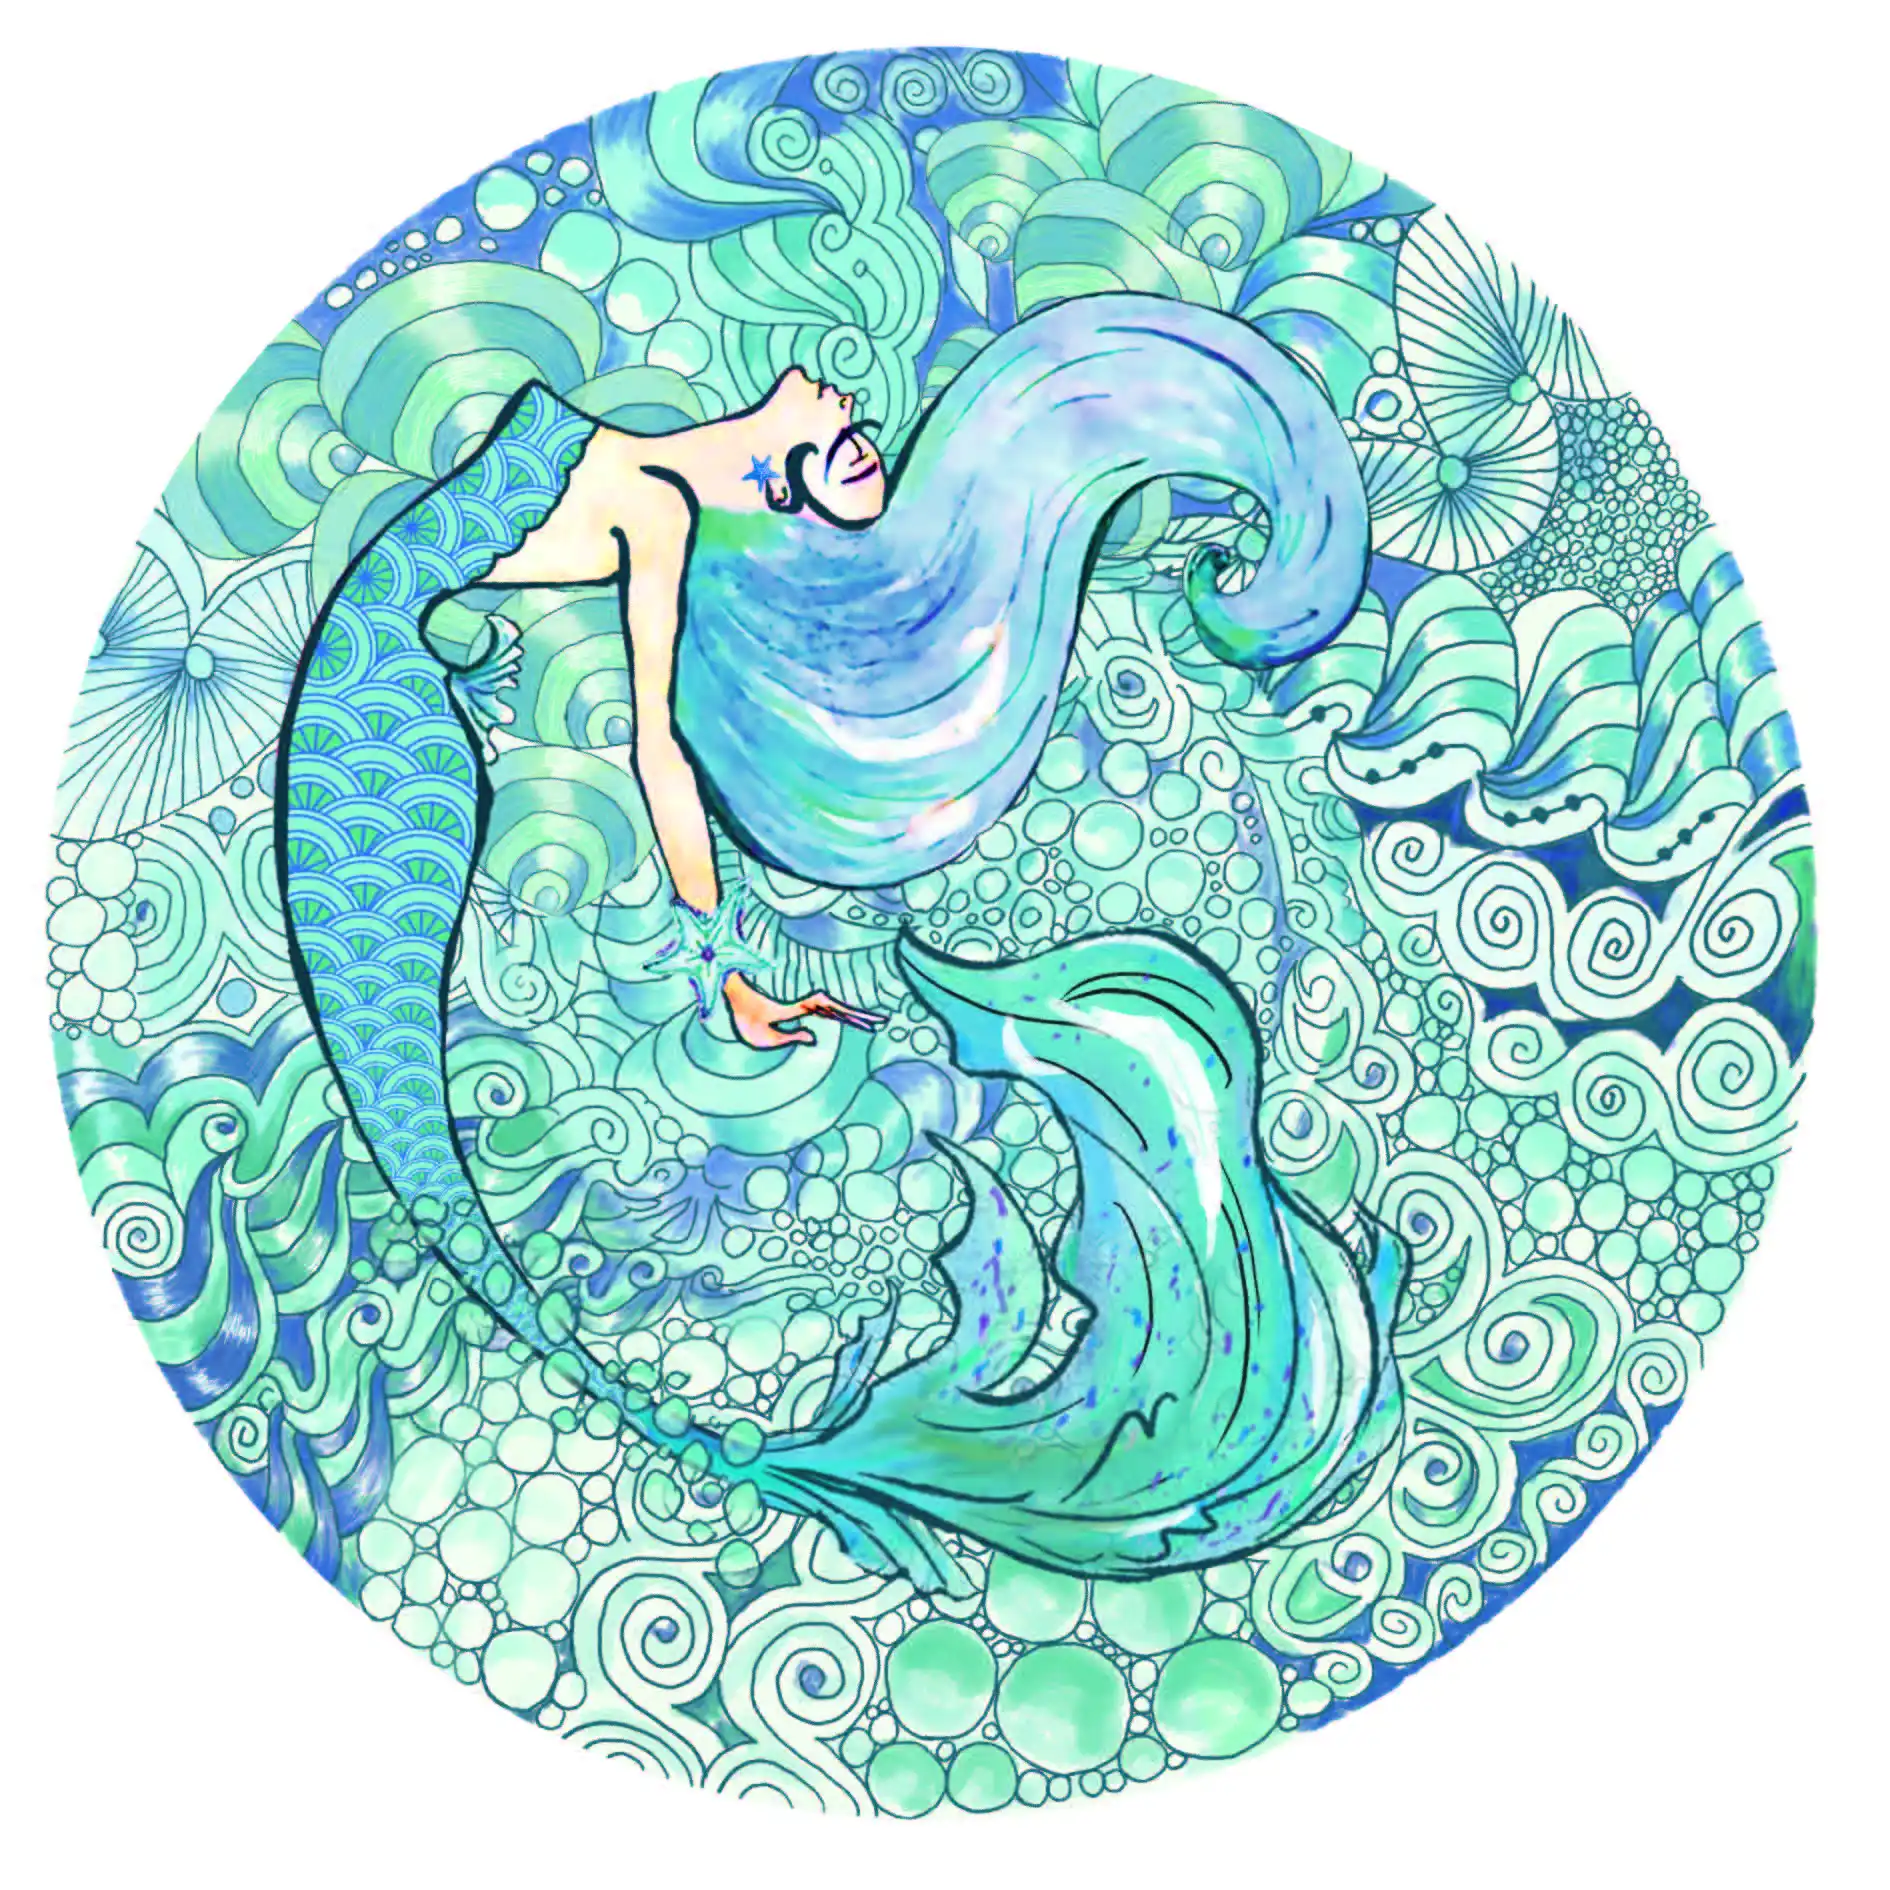 New Arrival Hologram 1000 Pieces Puzzles Holographic Printing Luminous Mermaid Wooden Jigsaw Puzzle Round Shape